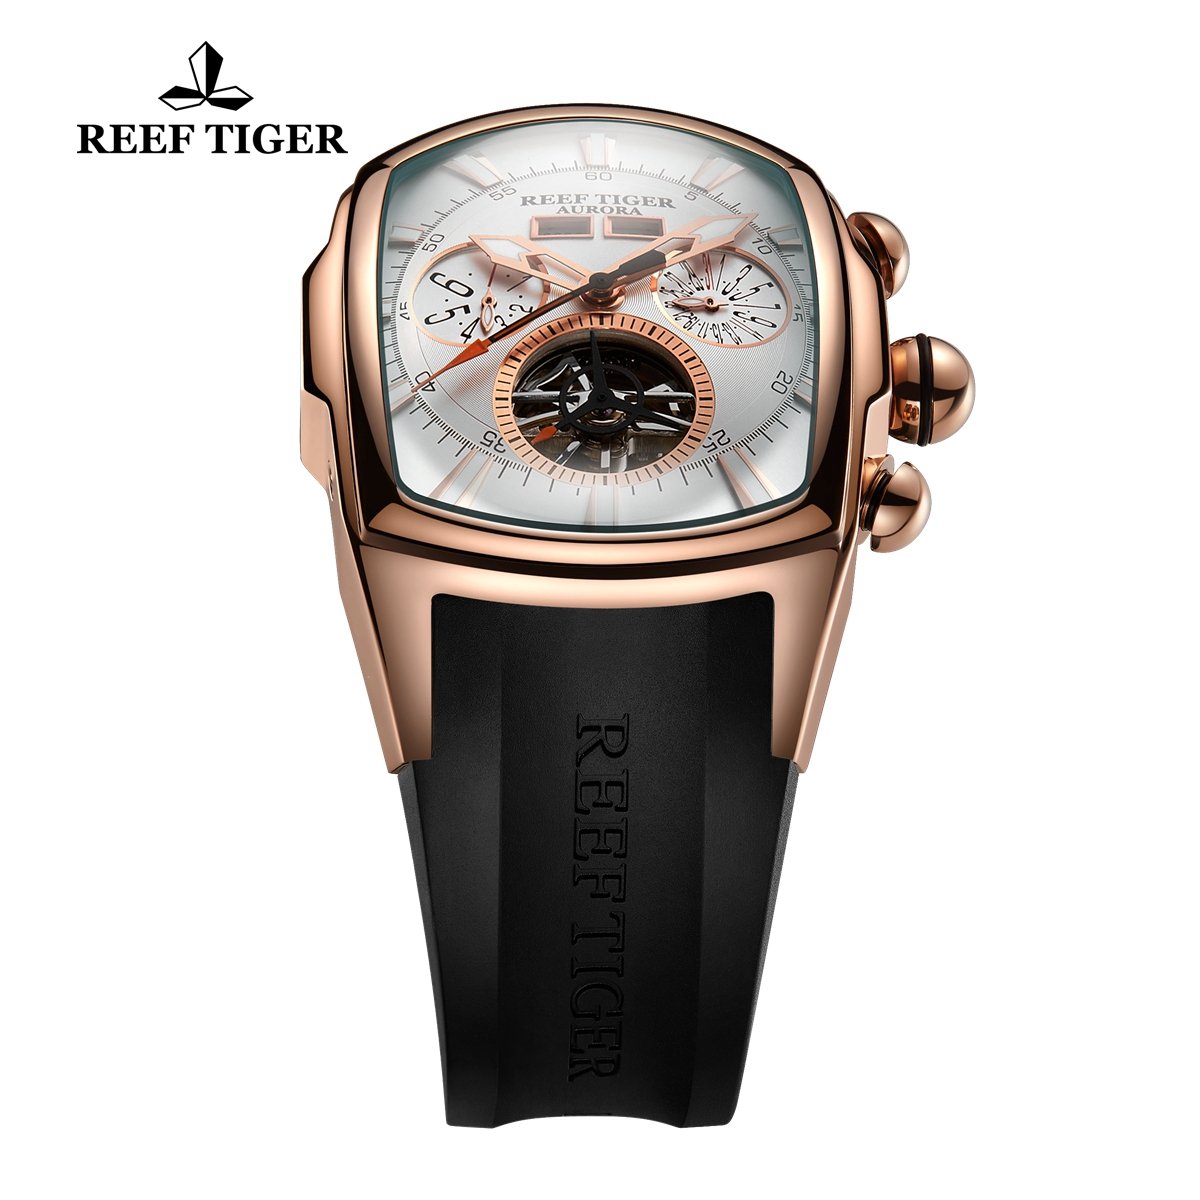 REEF TIGER Sport Watches for Men Rose Gold Tone Tourbillon Automatic Huge Big Watch Rubber Strap RGA3069